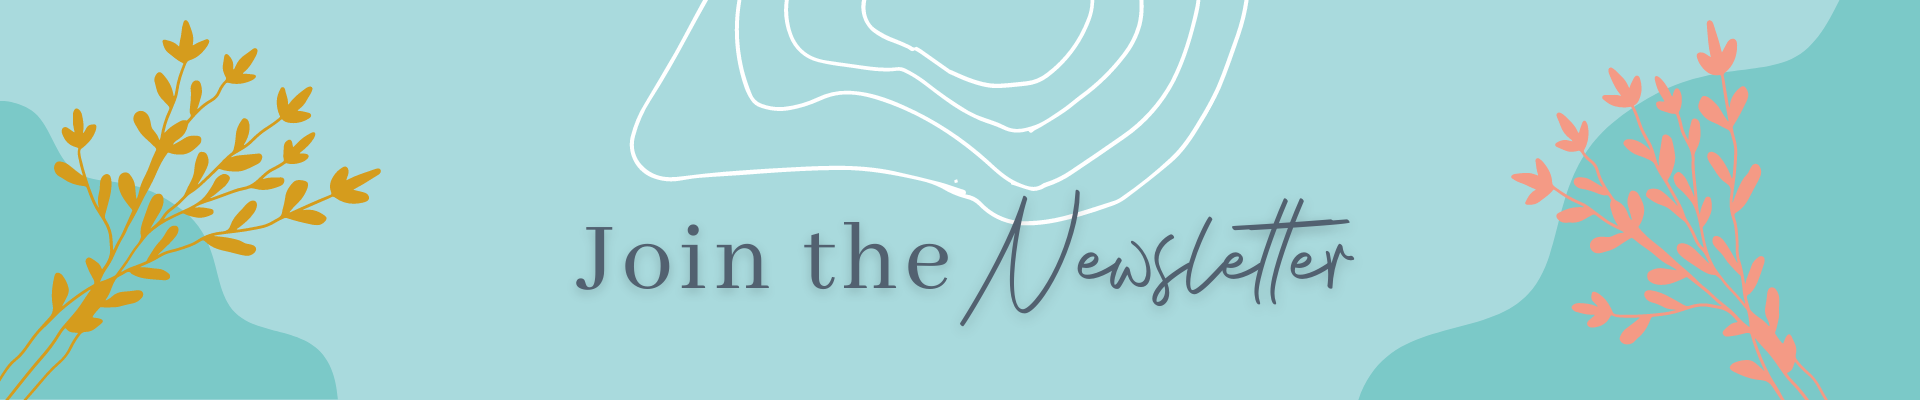 A light teal rectangle with illustrations of flowers and curved lines along with the text: "Join the newsletter."